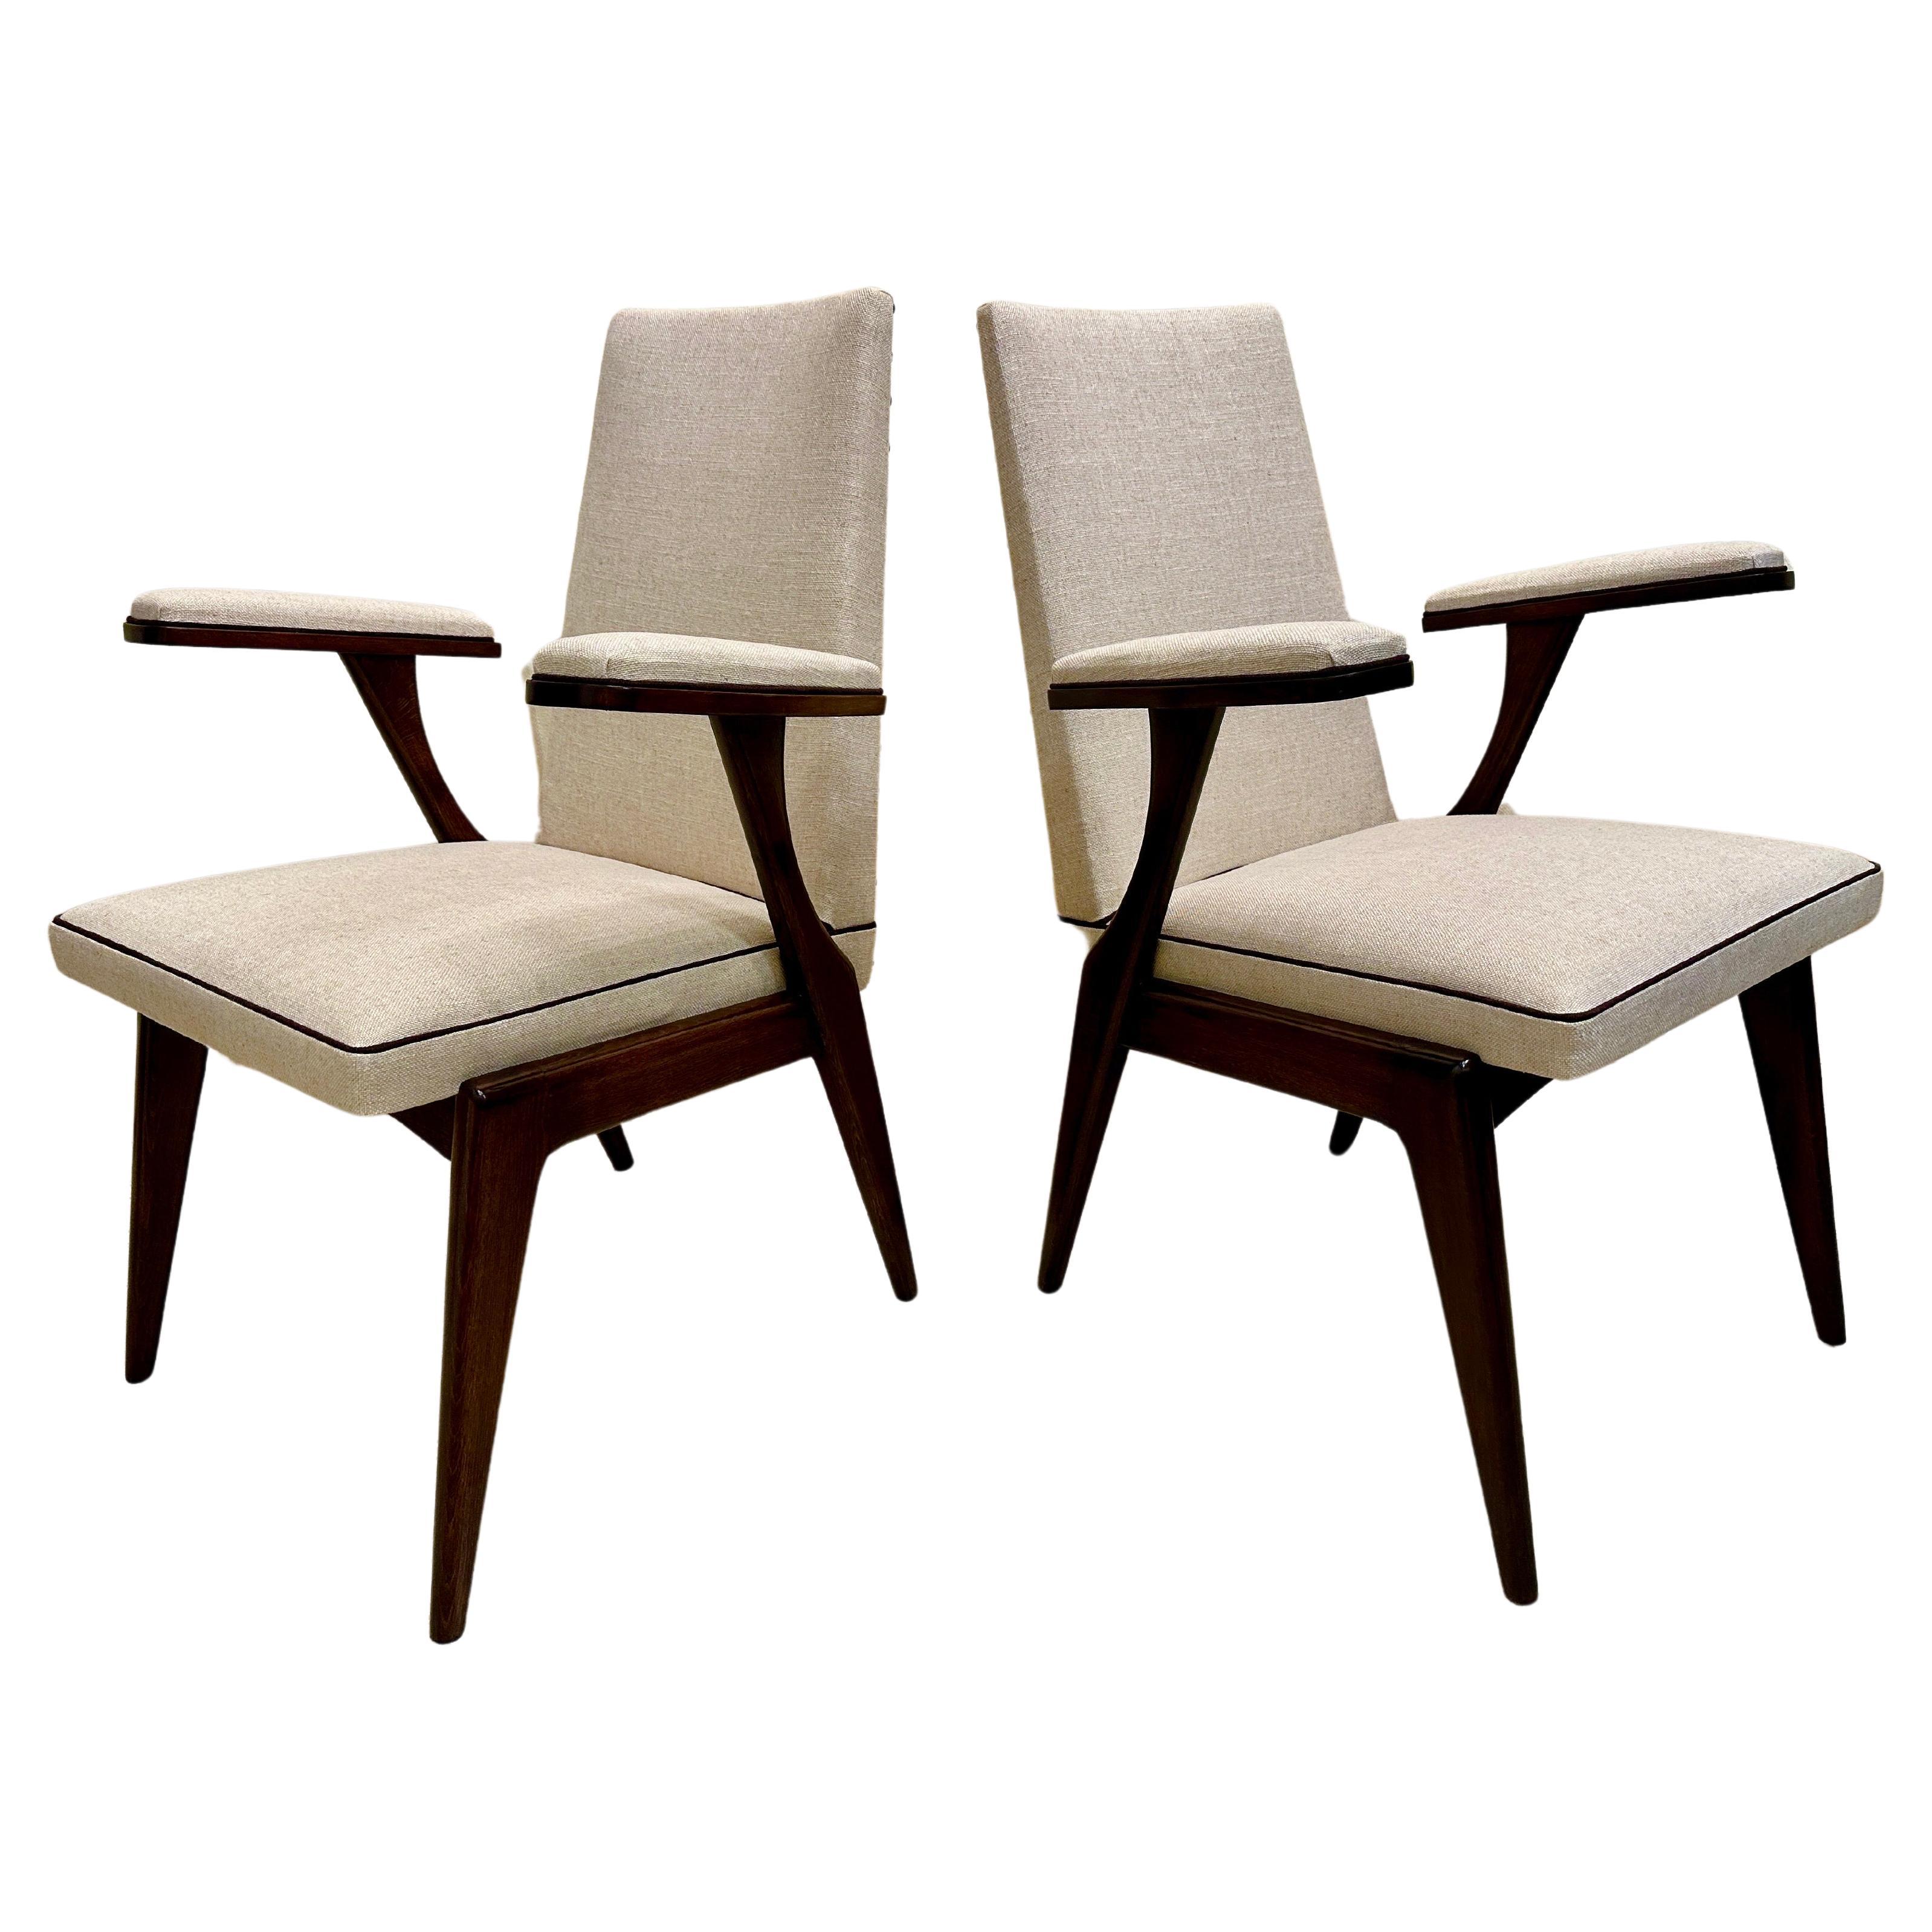 Sculptural French Walnut Side Chairs, Pair For Sale